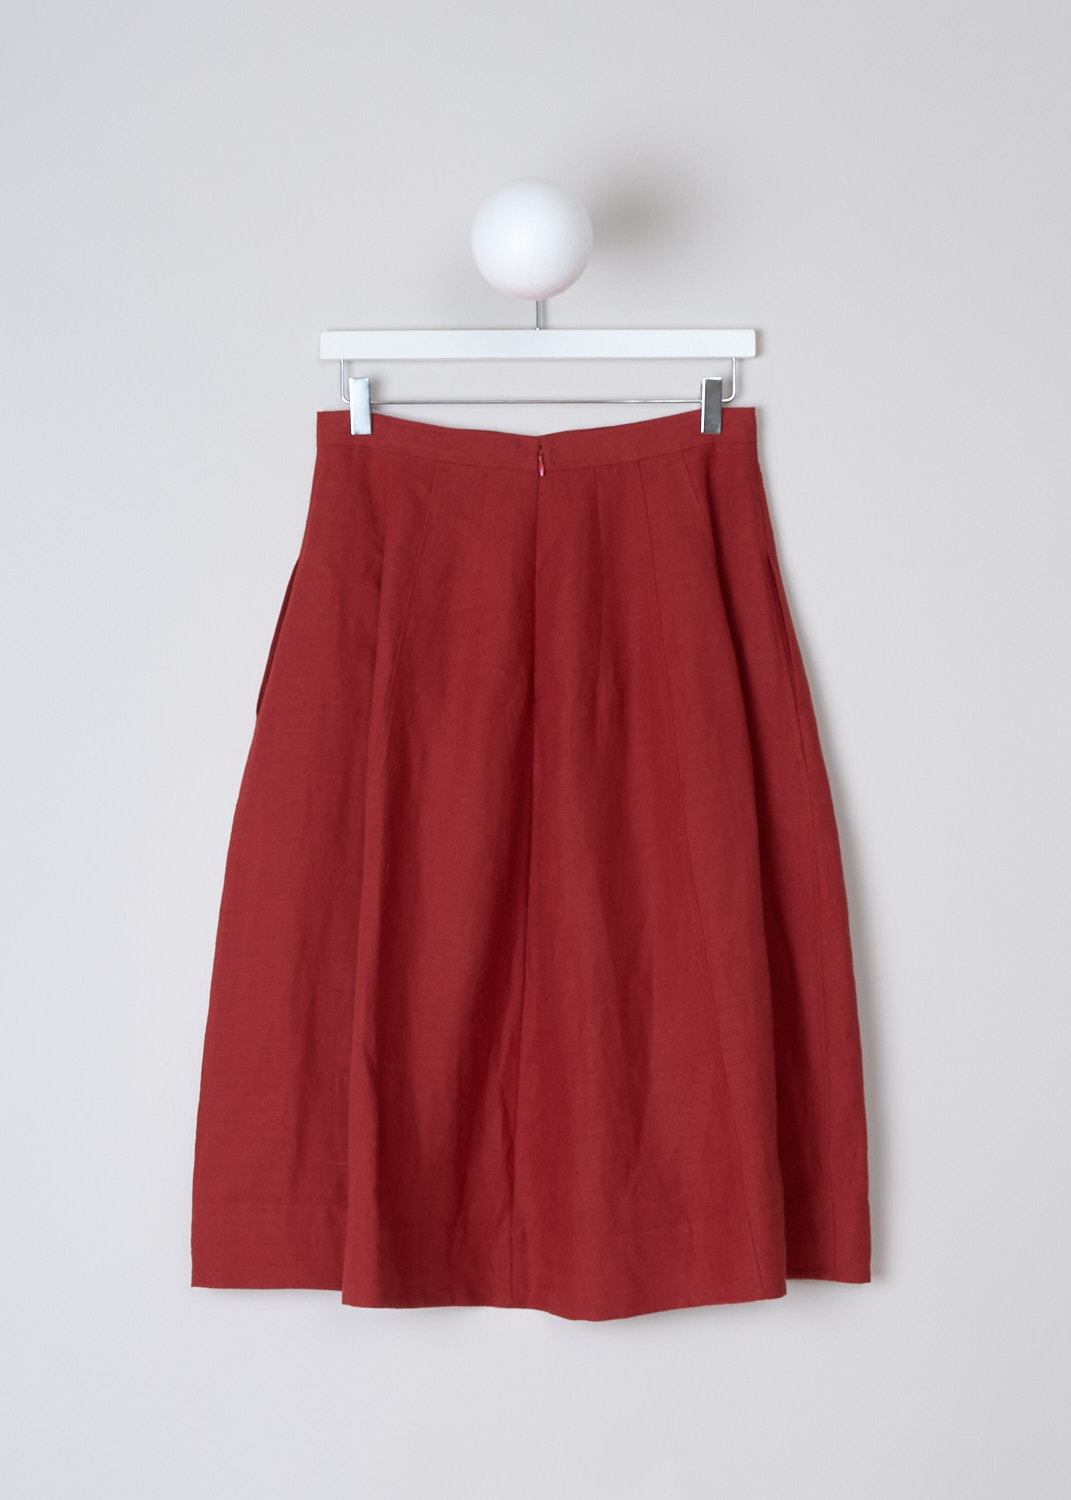 CHLOÉ, LINEN A-LINE SKIRT IN PEPPERY RED, CHC23UJU08030649_PEPPERY_RED, Red, Back, This Peppery Red linen midi skirt has a wide A-line silhouette. The skirt has a narrow waistband. Concealed slanted pockets can be found in the side seam. In the back, a concealed centre zip functions as the closure. The skirt has a straight hemline. 
